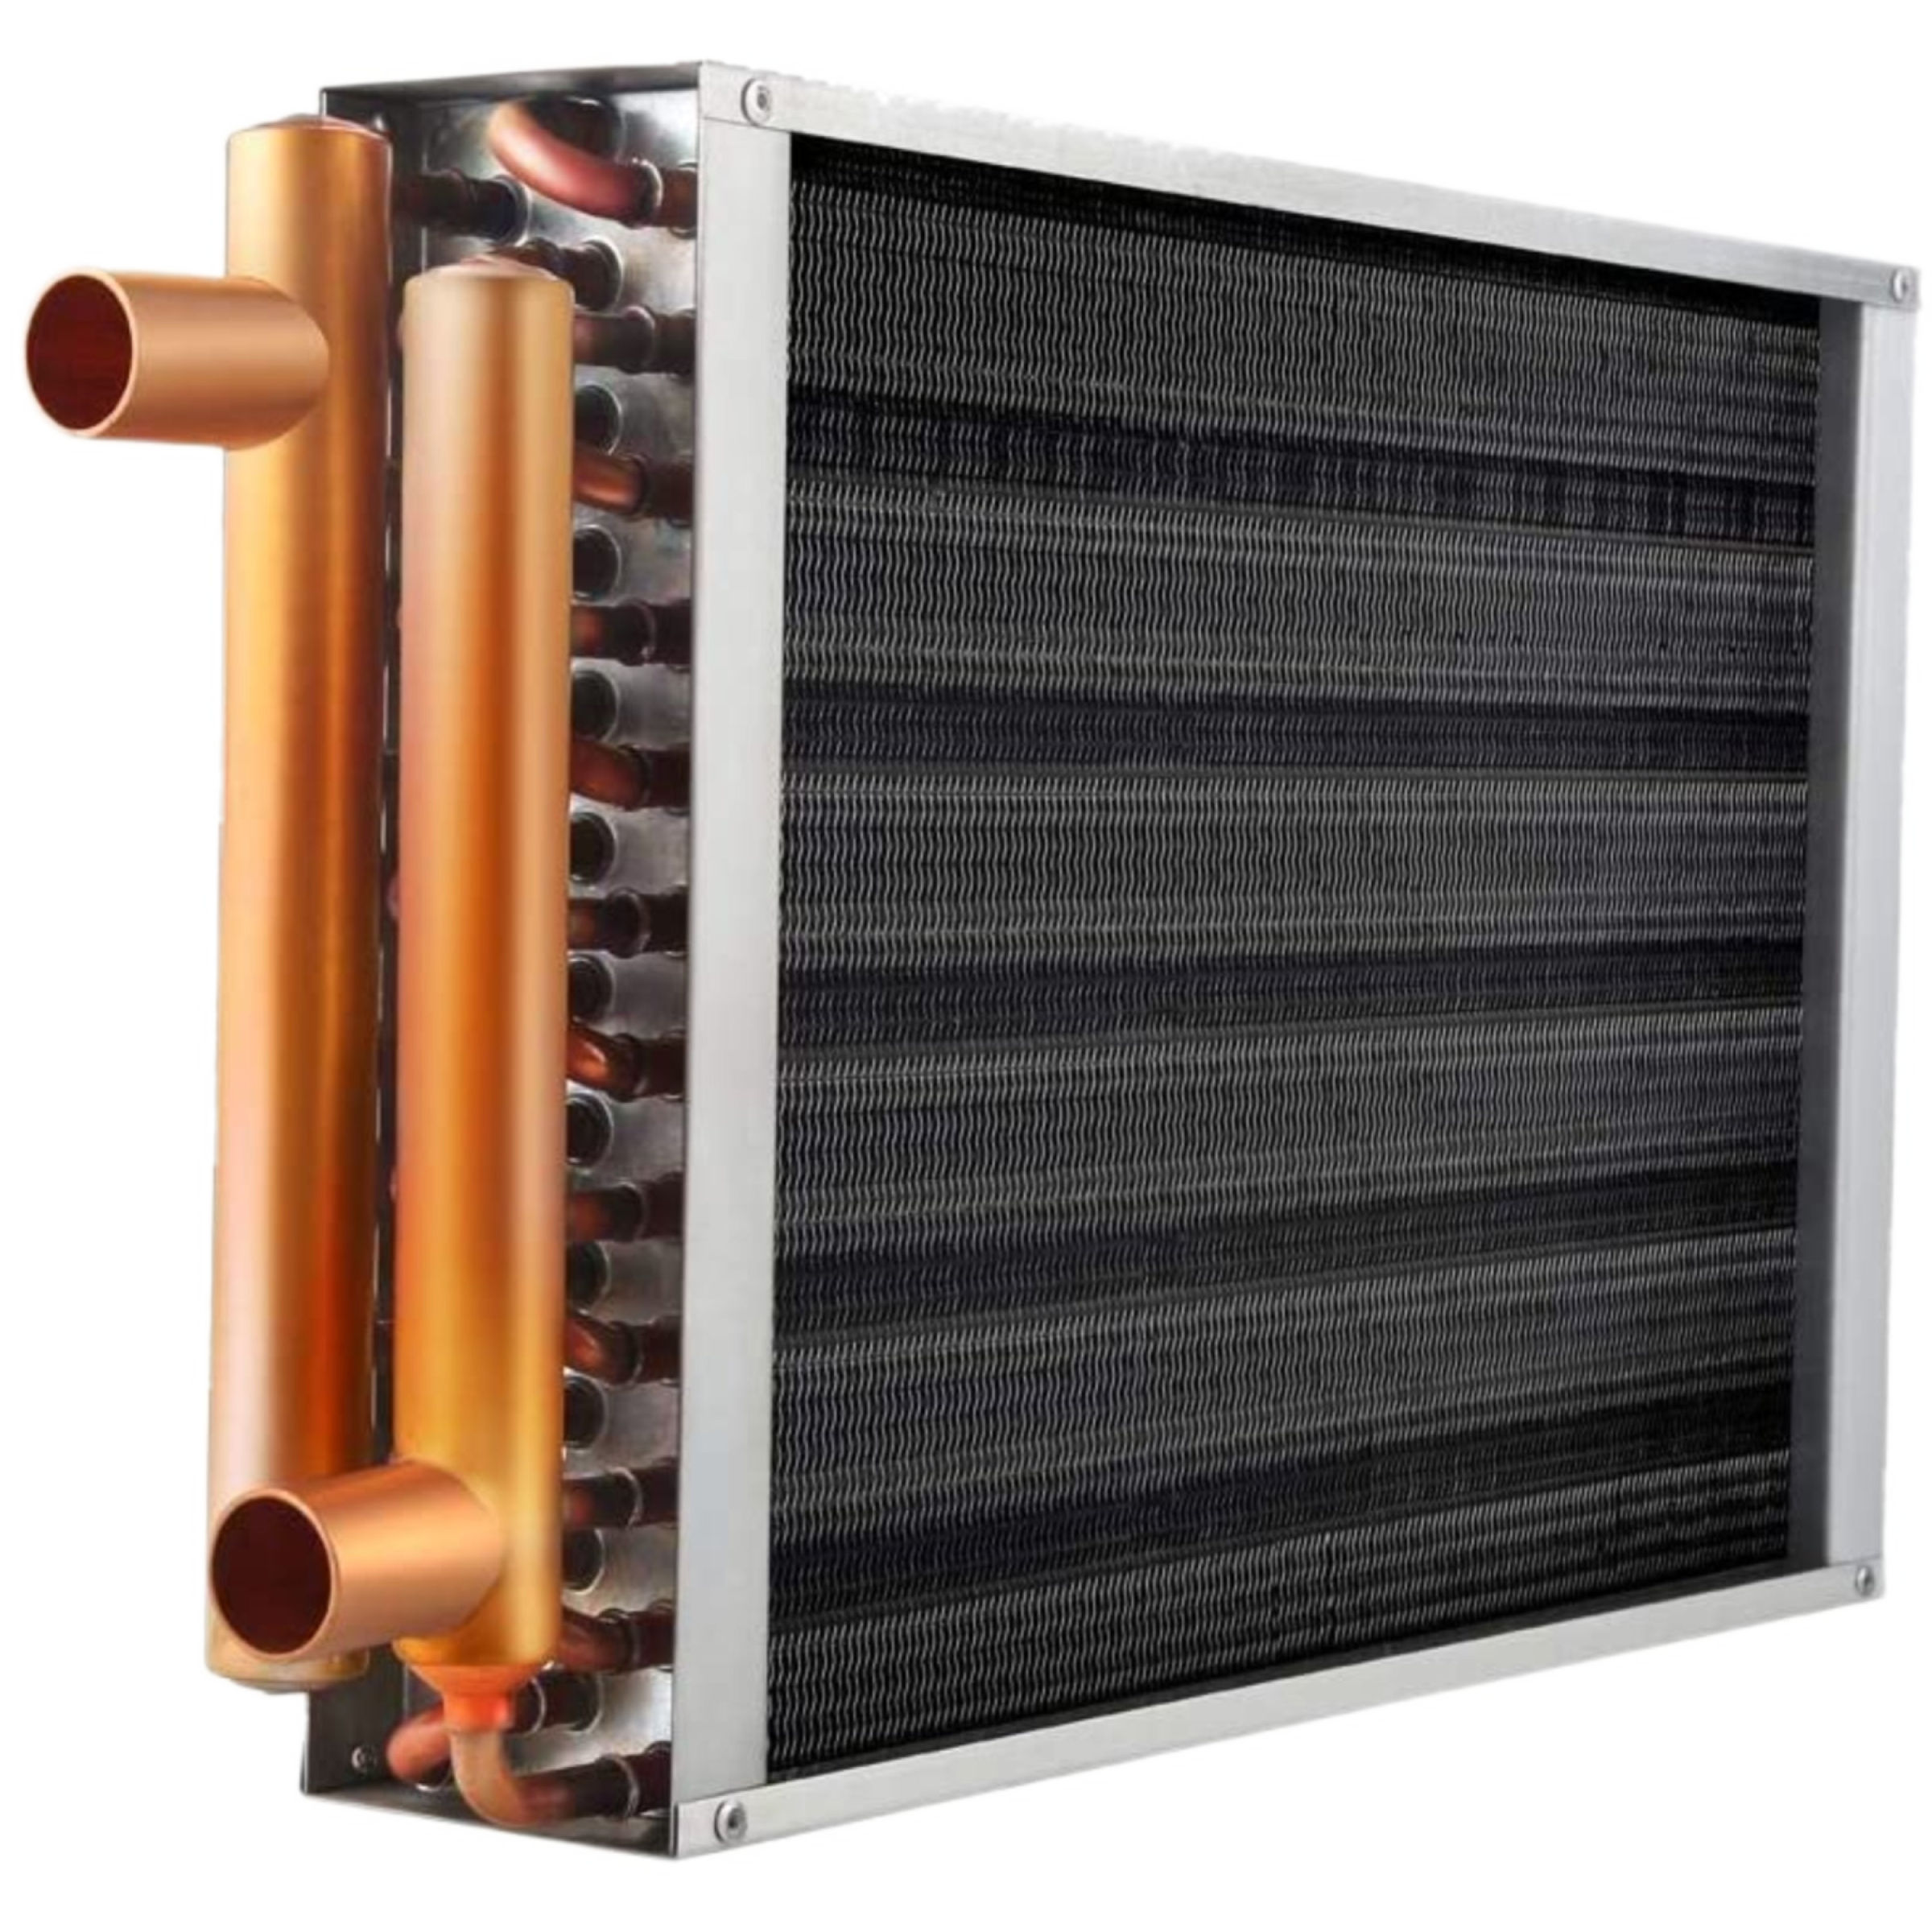 HTL 18 X 20 Hydronic Coil Air to Water Heat Exchanger 14GPM, PD 1.32 PSI, 131118 BTU/h to 140000 BTU/h